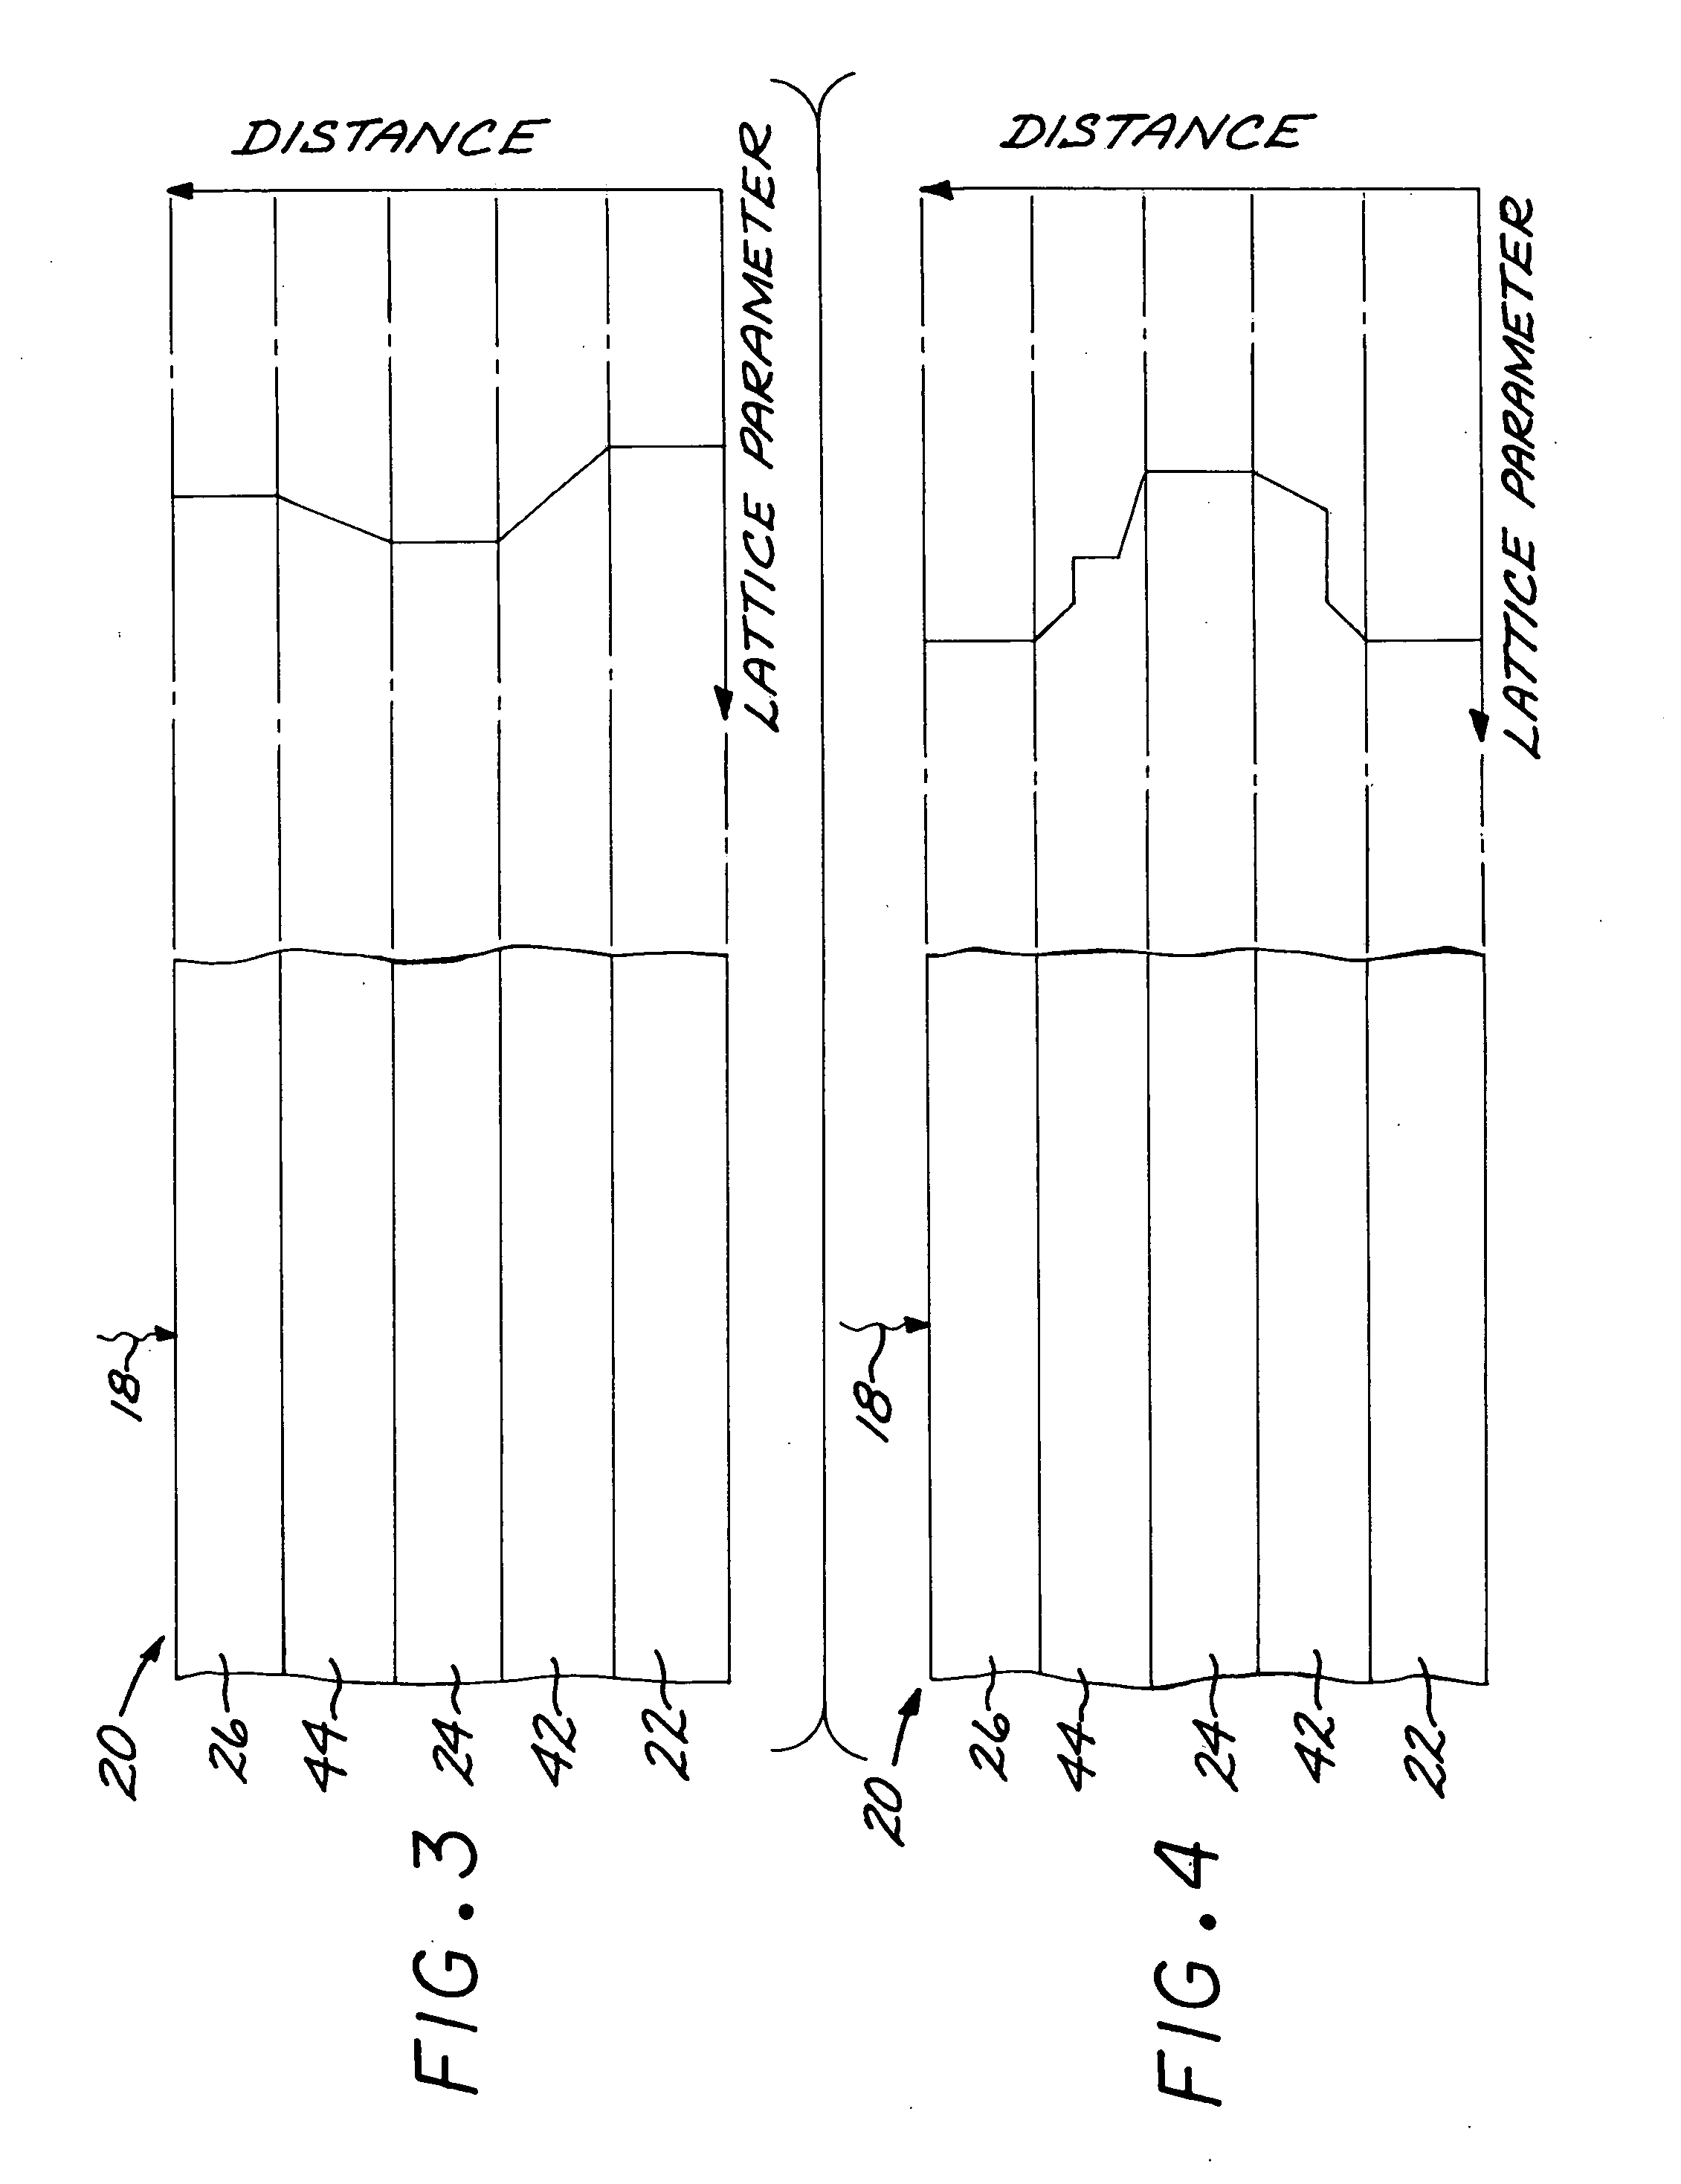 Solar cells having a transparent composition-graded buffer layer